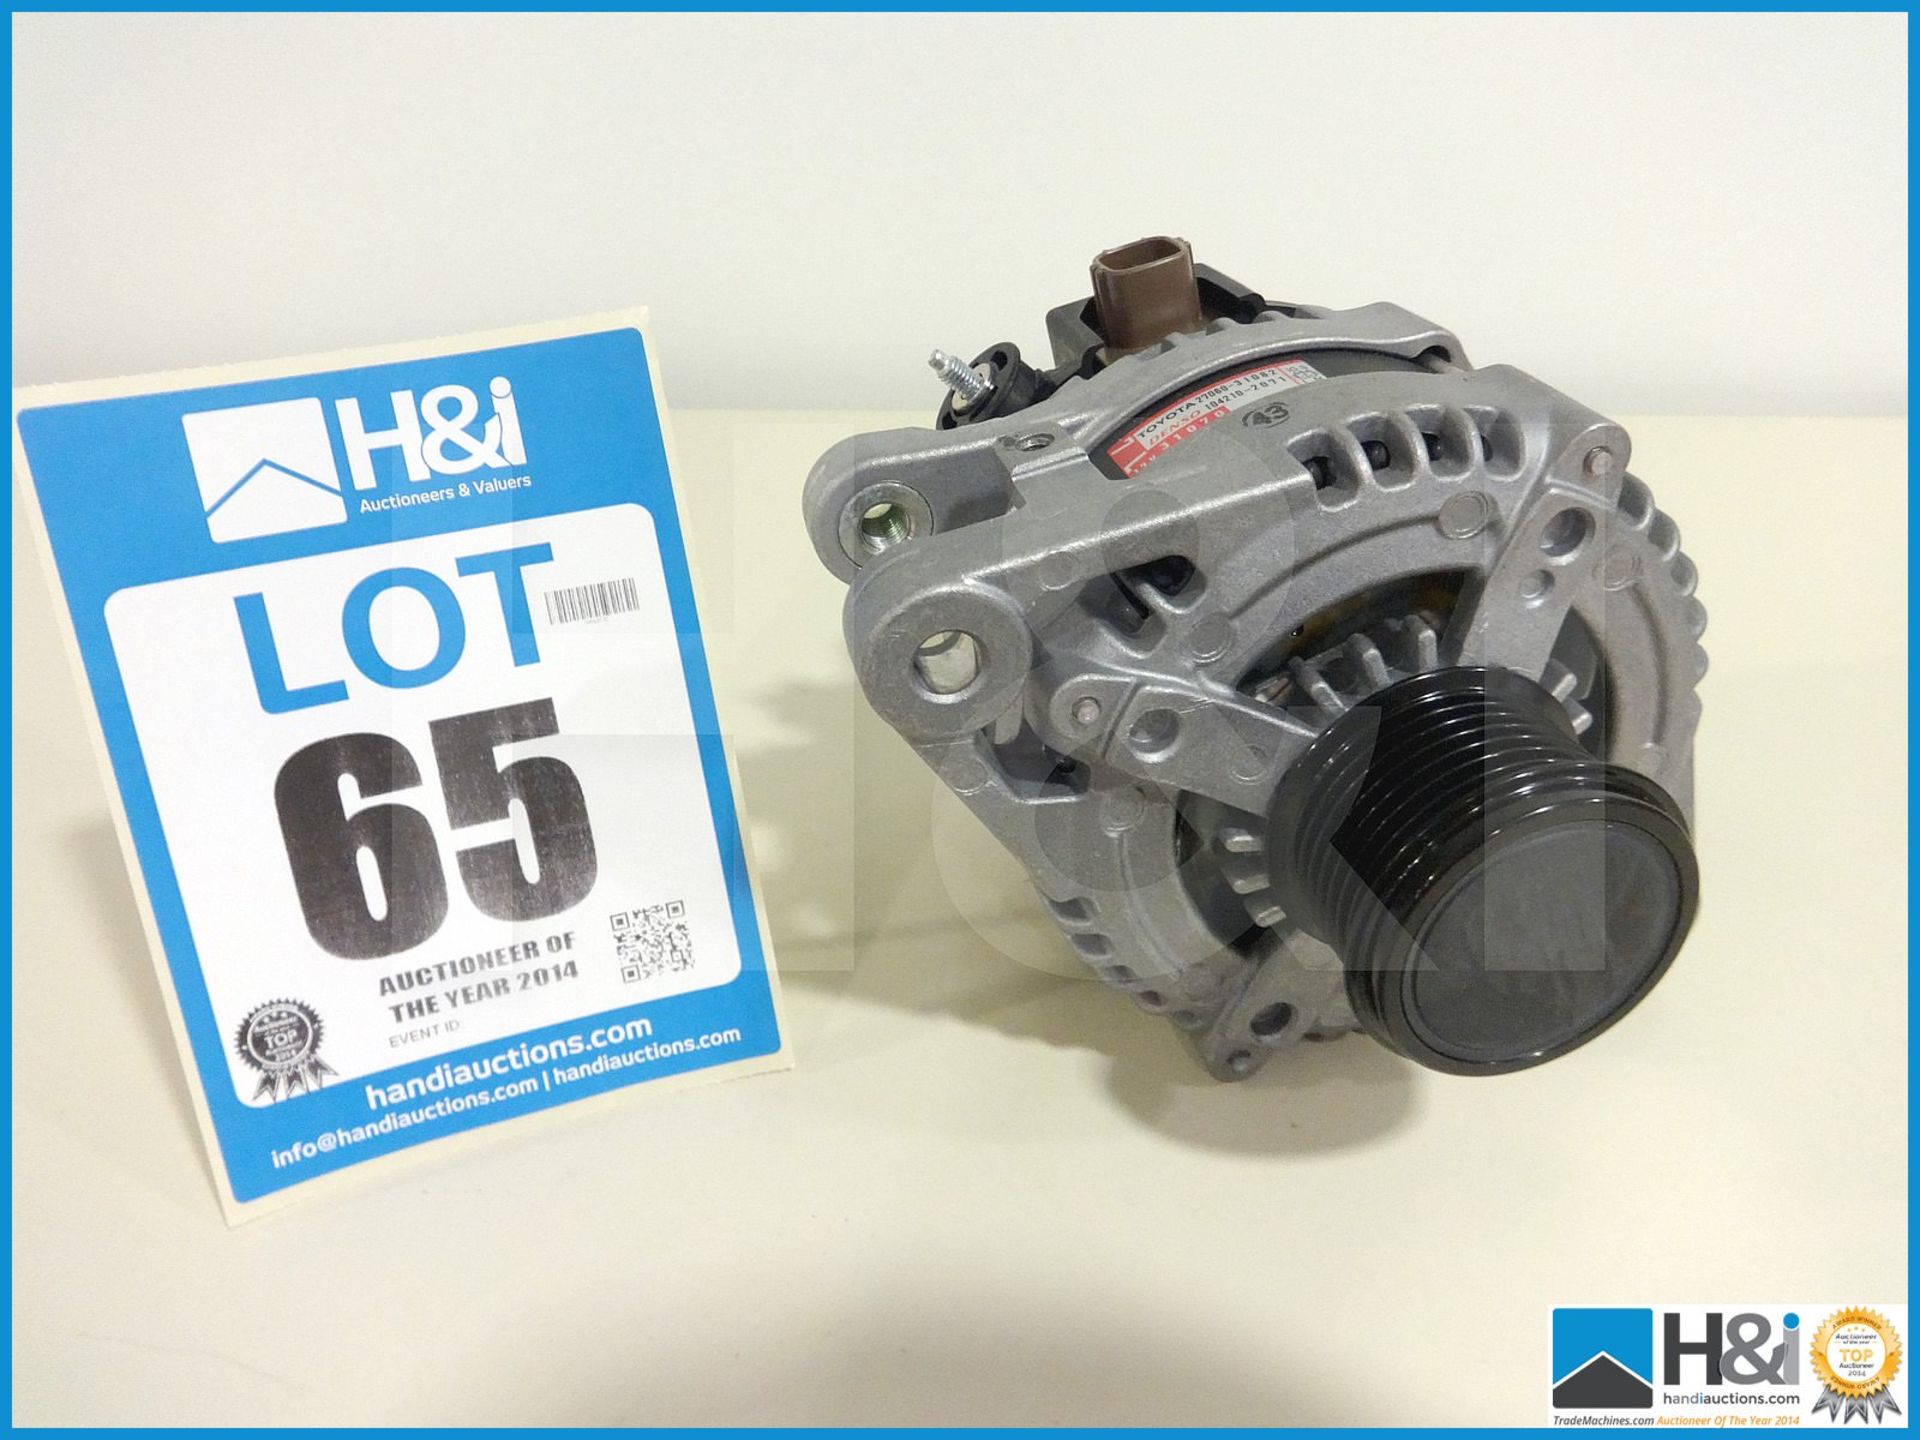 Alternator to suit V6 Lotus Evora engine. Brand new and unused. MC: N/A CILN: N/A